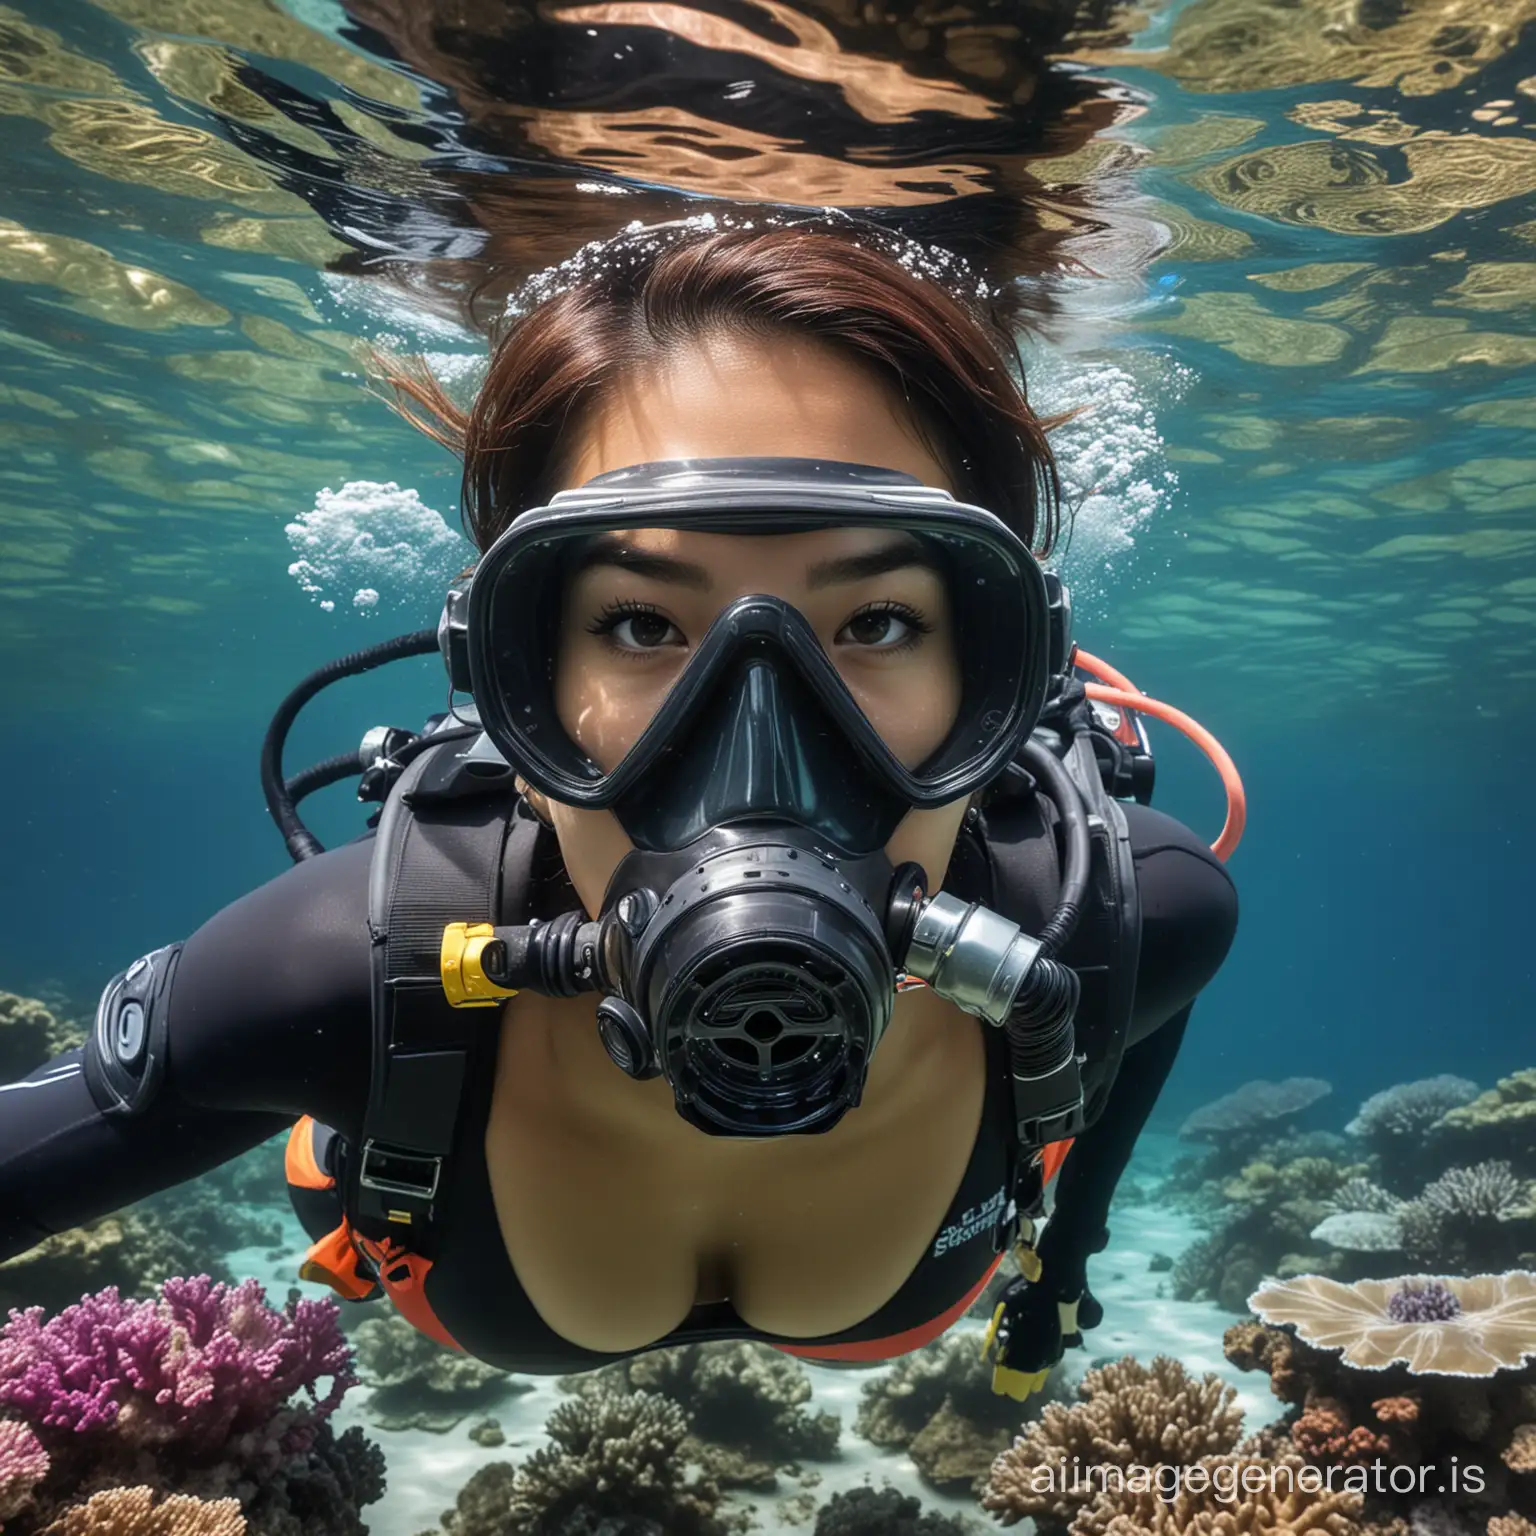 Busty Asian scuba diver underwater with realistic scuba gear. Mask is covering eyes and mouthpiece is in mouth. In deep water with colourful reef in background. Wearing bikini